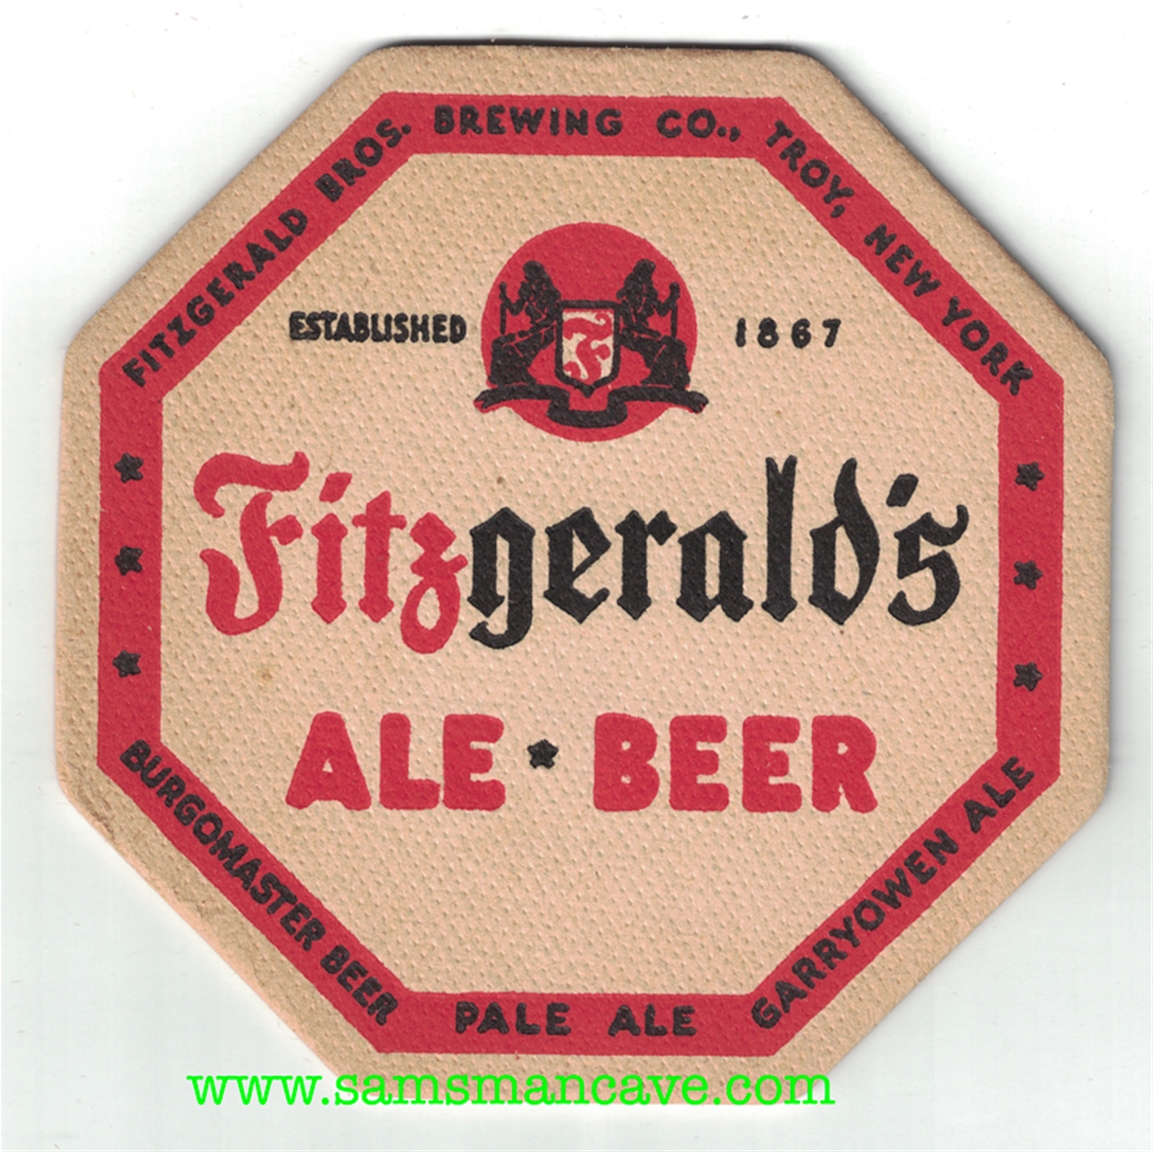 Fitzgerald's Ale Beer Coaster